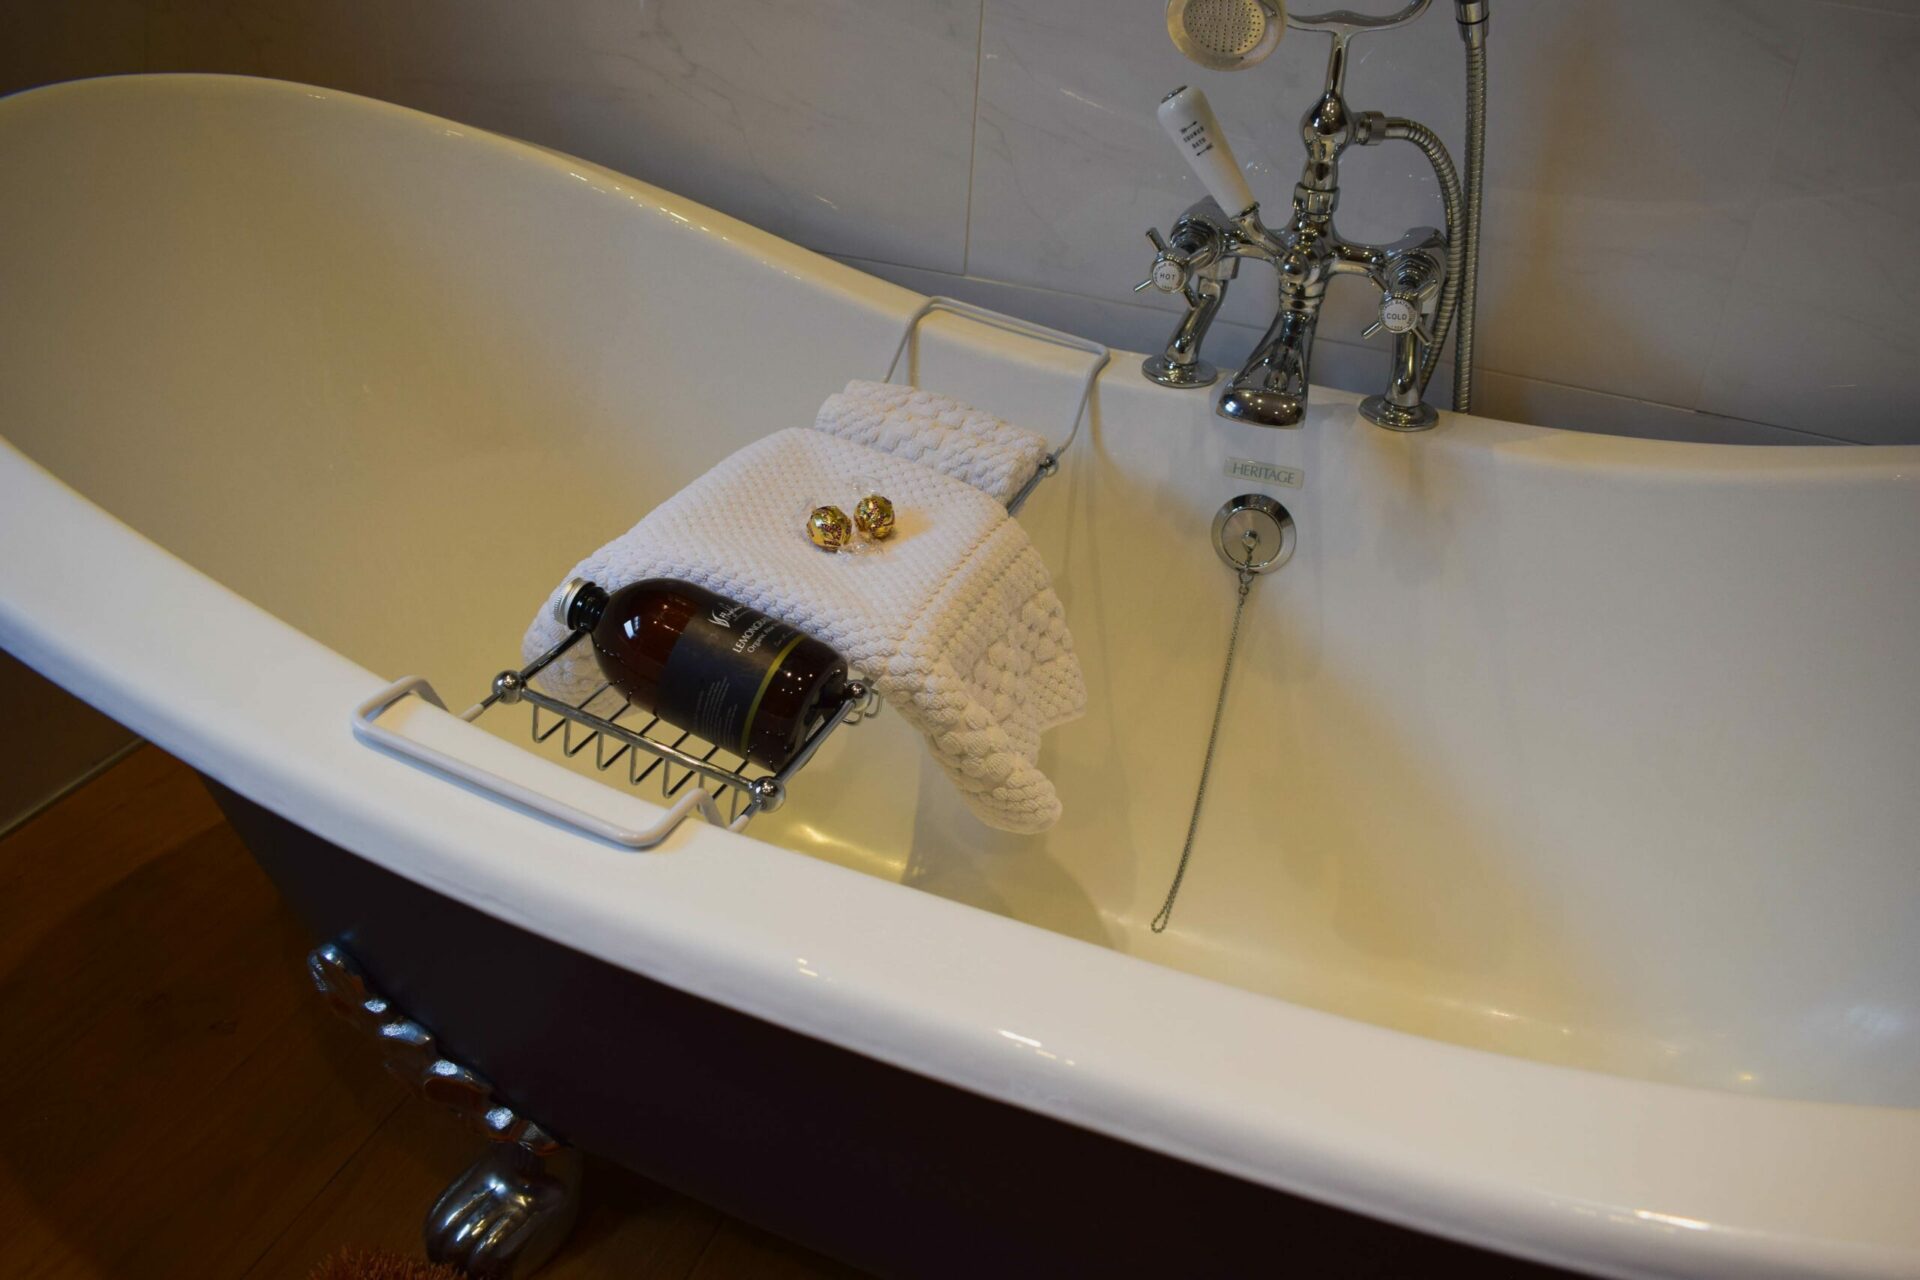 The two person bath in our Allanbreck Hideway with little treats to enjoy whilst relaxing in the bubbles